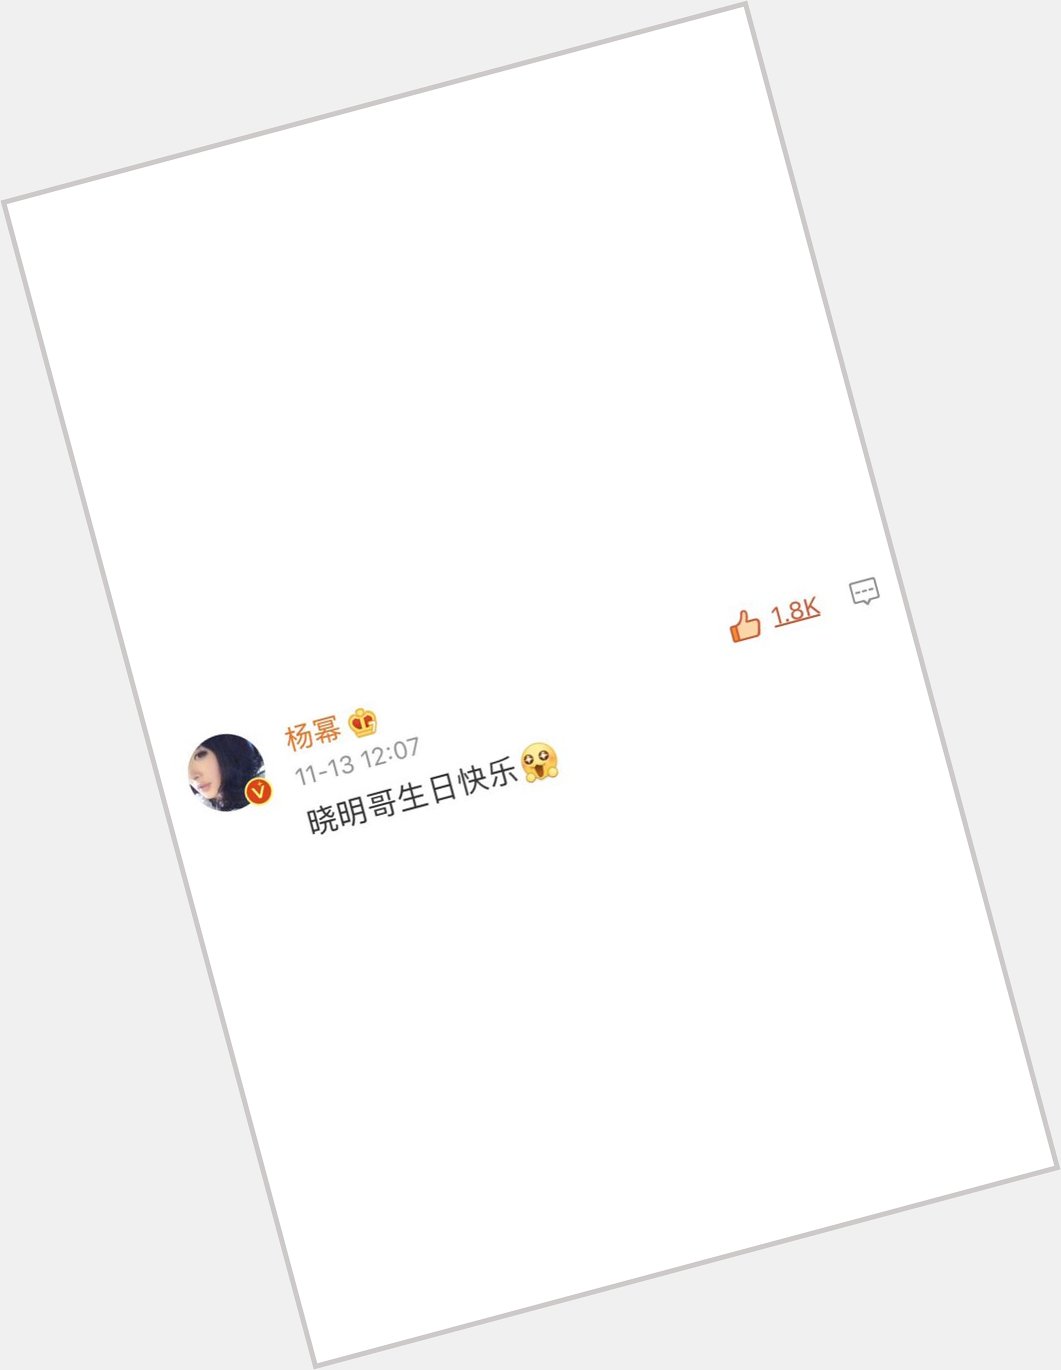 Yang Mi wished a happy birthday to Huang Xiaoming Happy birthday Xiaomingge   111319    